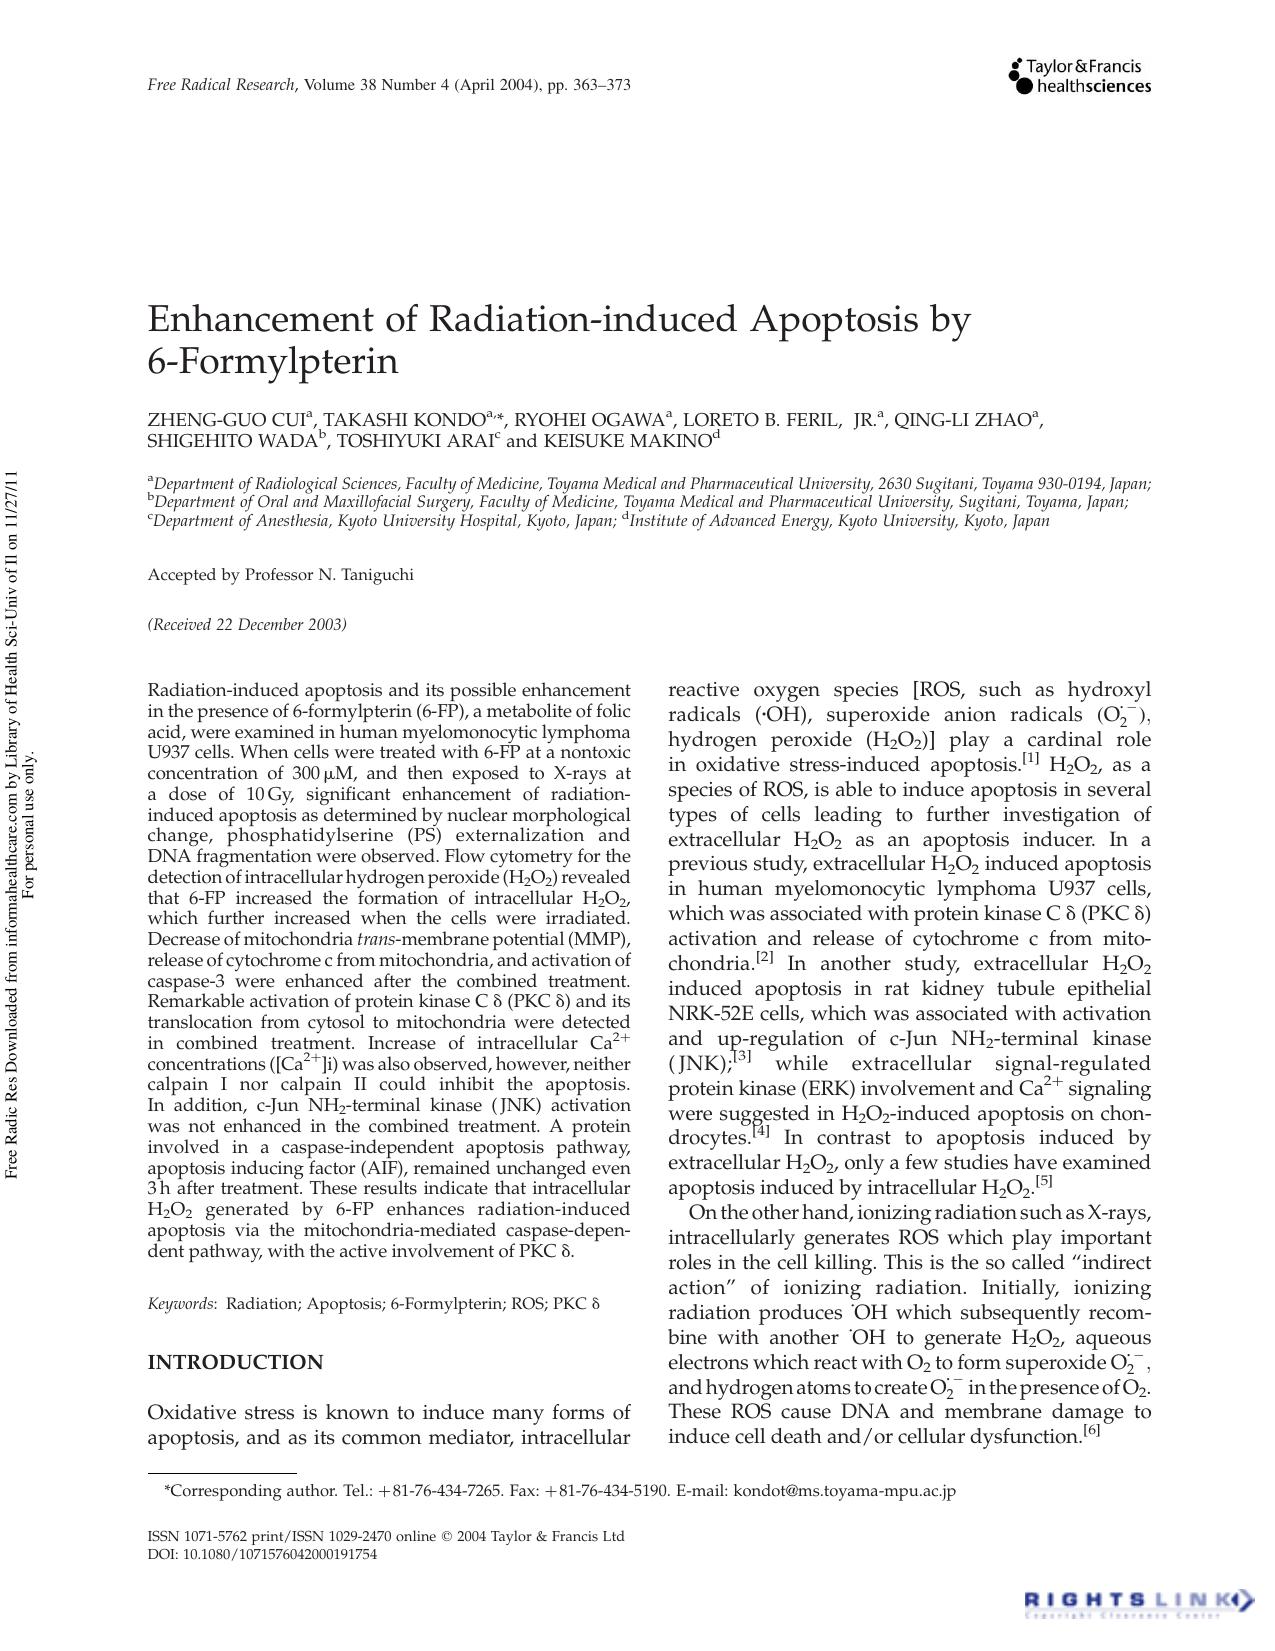 Enhancement of Radiation-induced Apoptosis by 6-Formylpterin by unknow